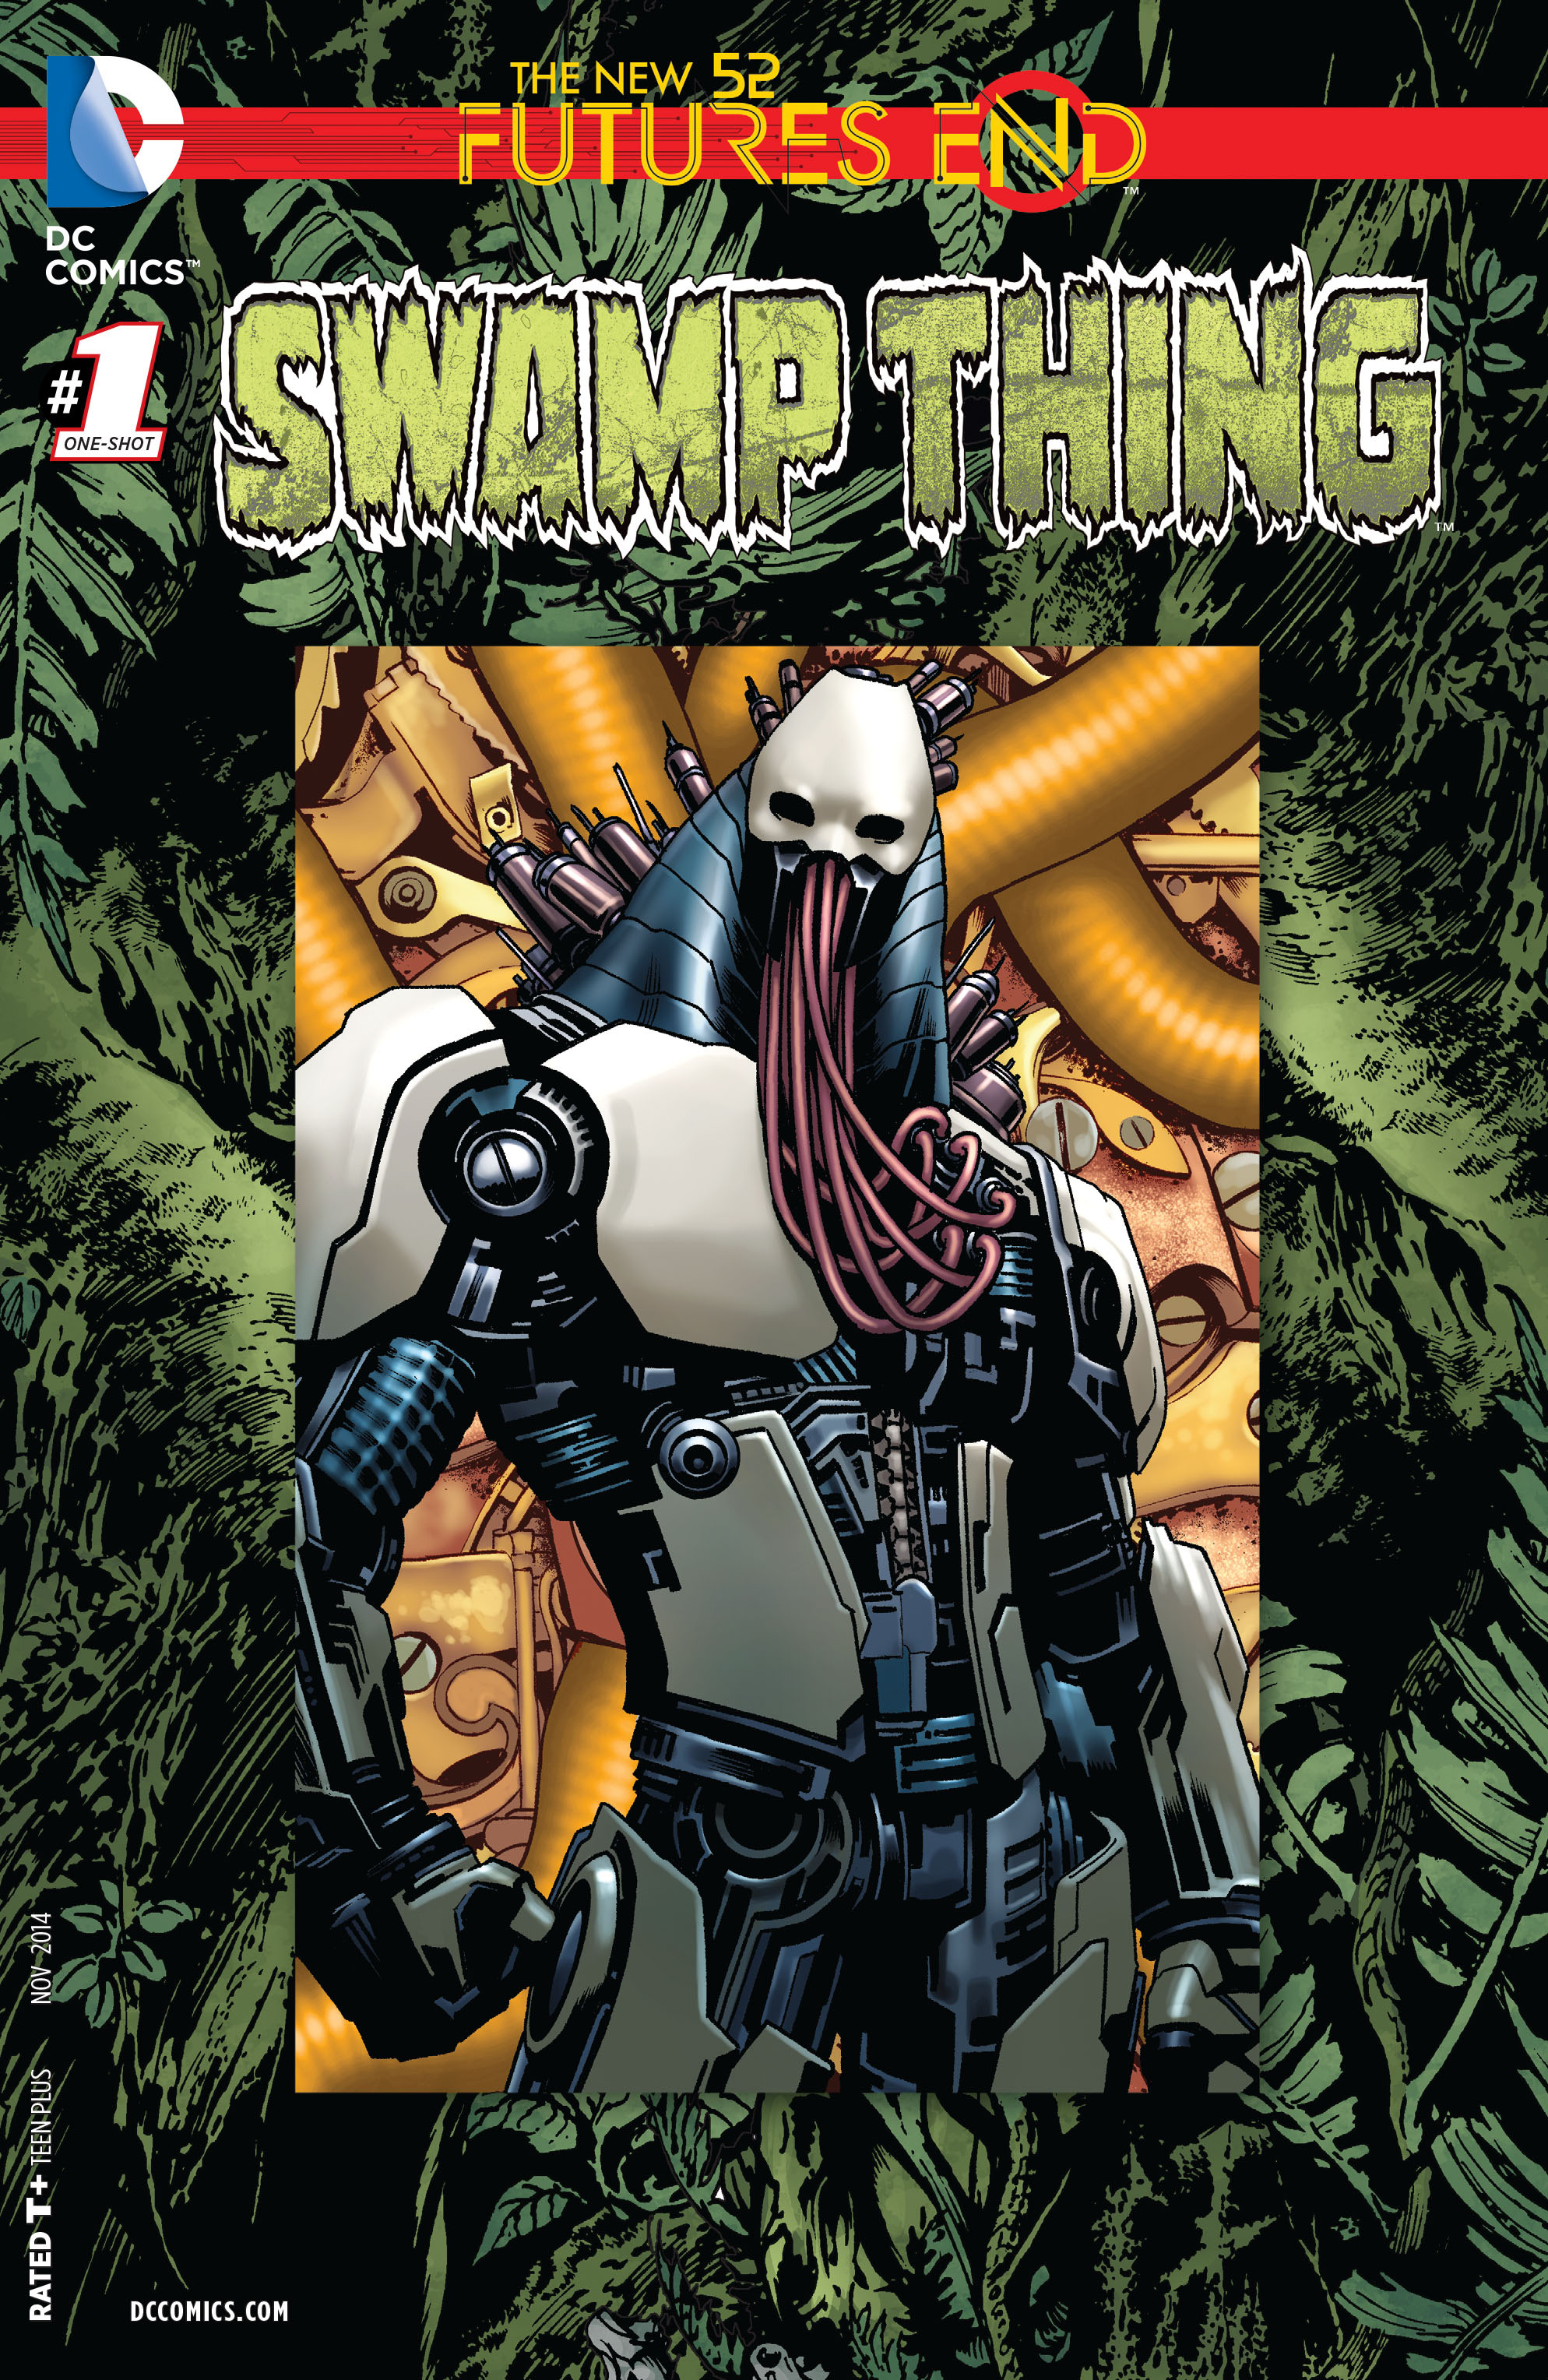 Swamp Thing Toon Xxx - Swamp Thing Futures End Full | Read Swamp Thing Futures End Full comic  online in high quality. Read Full Comic online for free - Read comics  online in high quality .| READ COMIC ONLINE